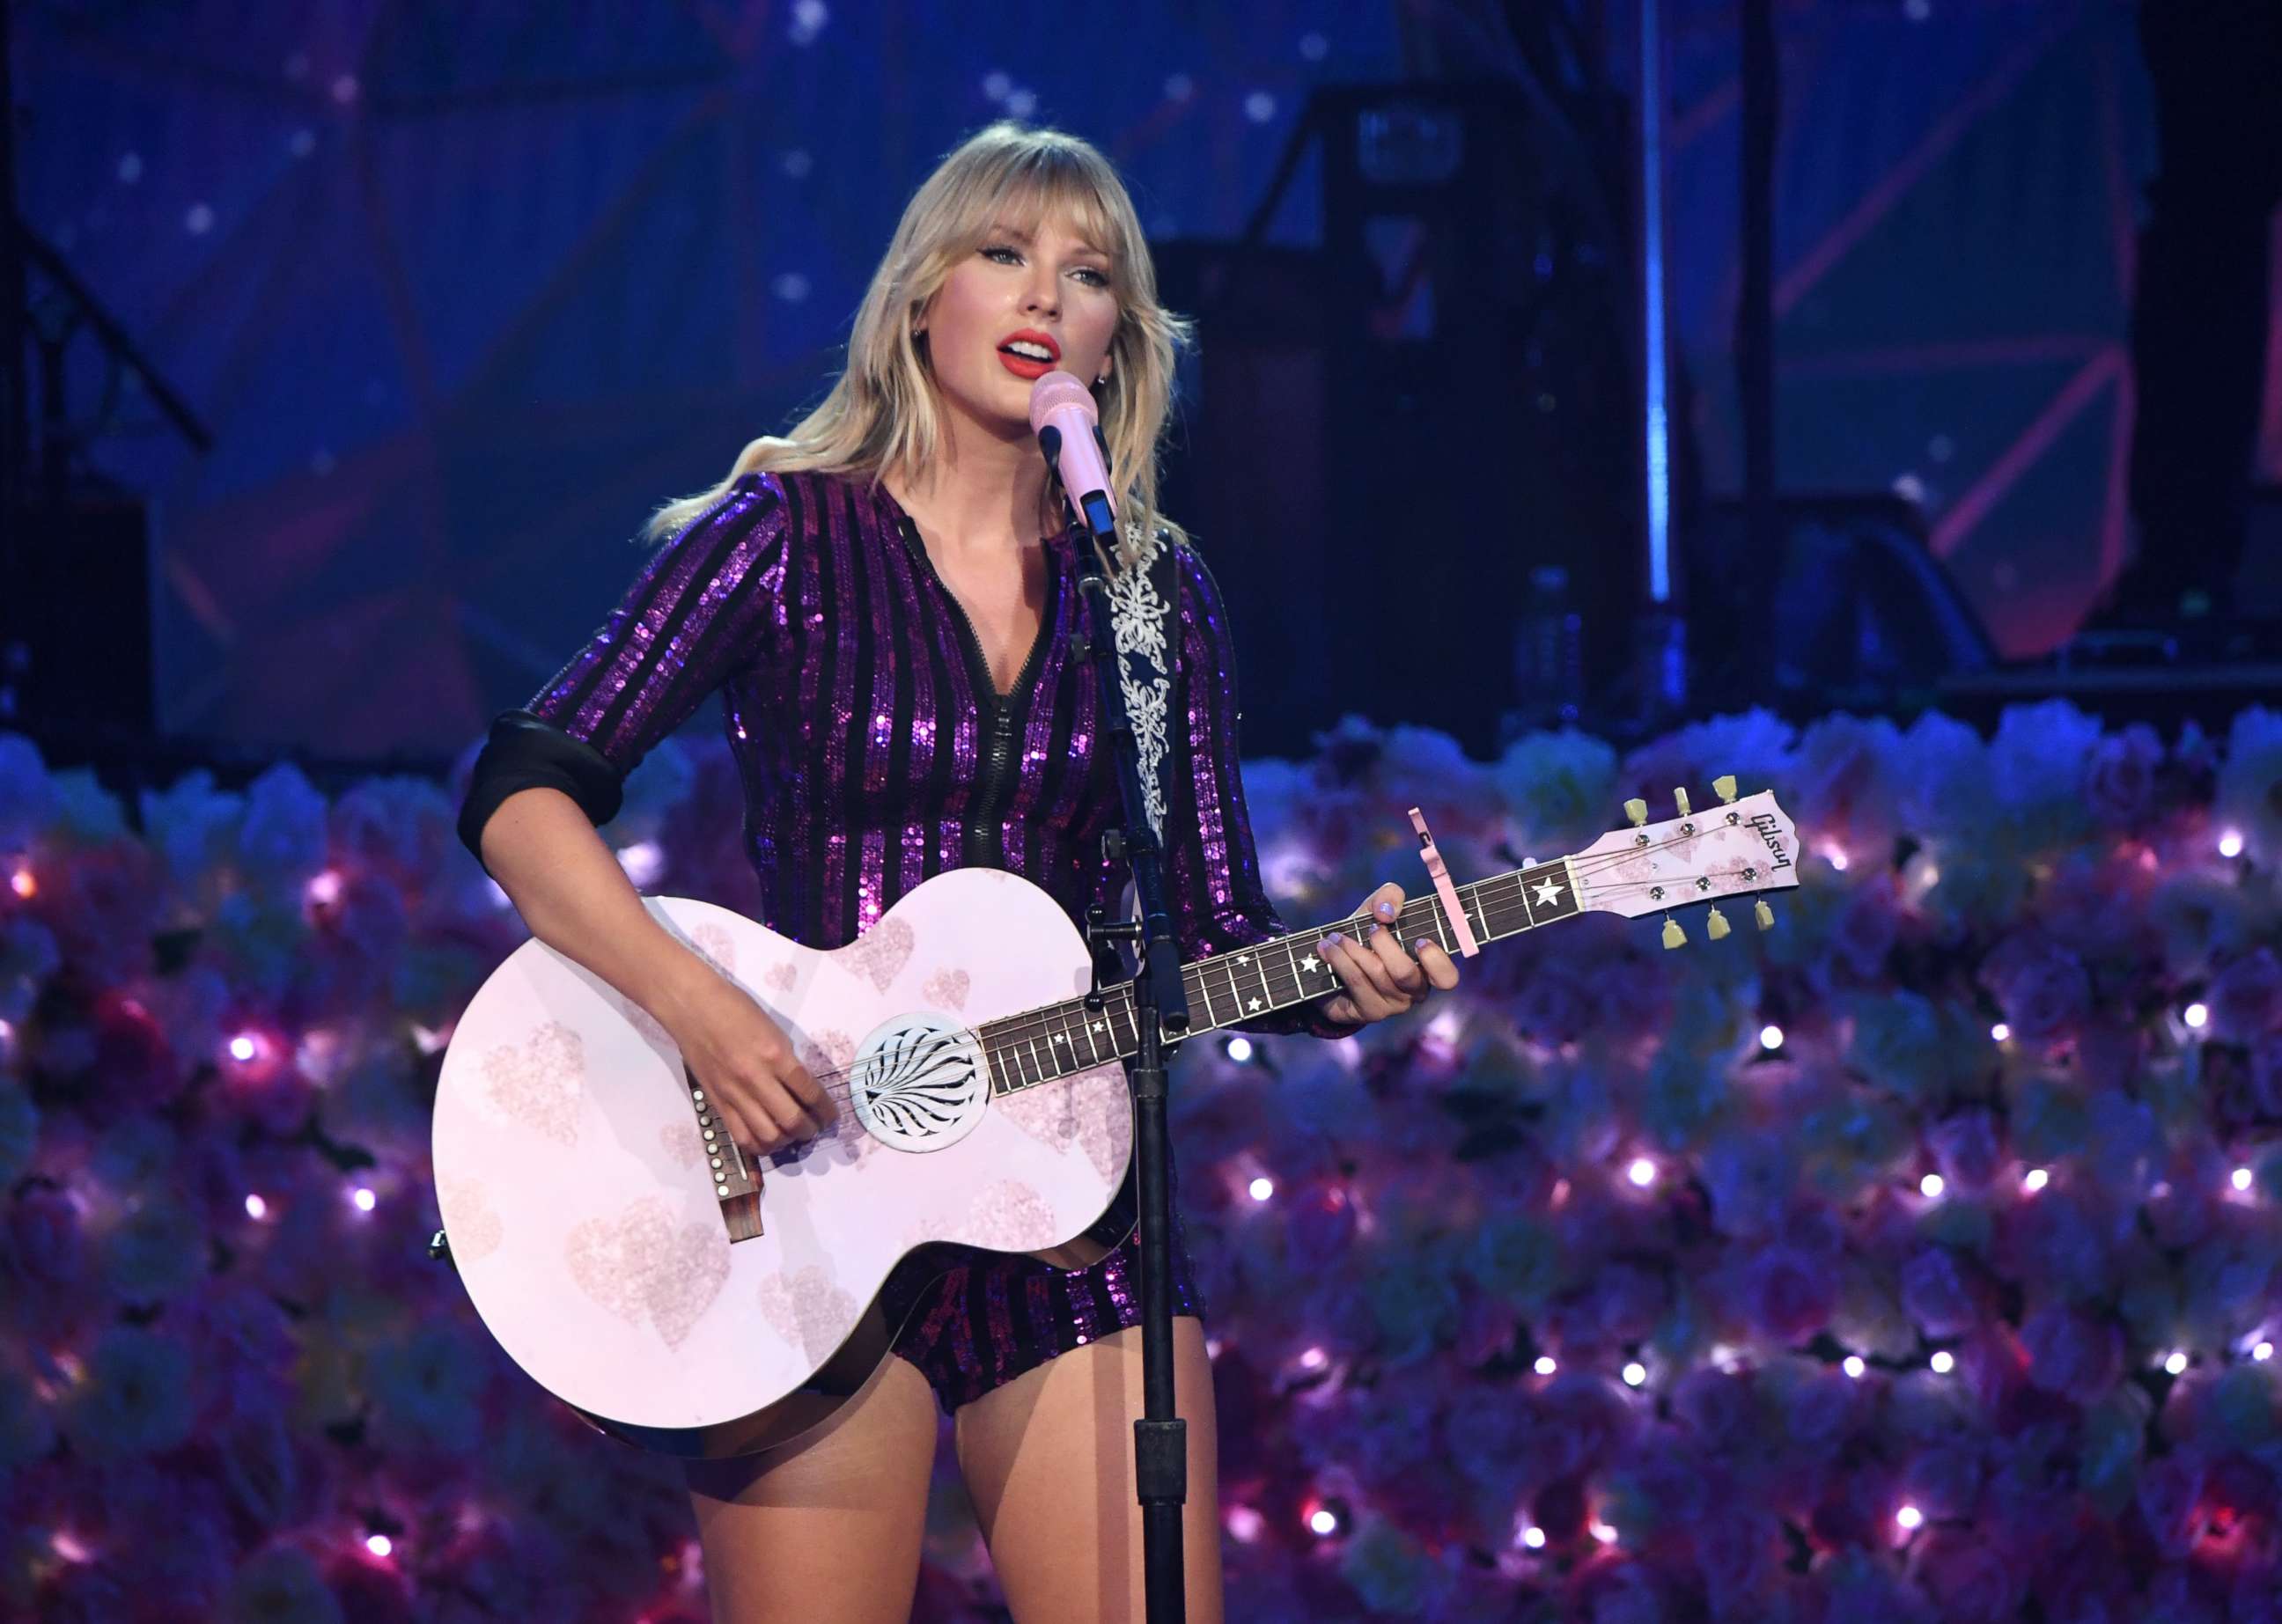 US Navy band puts sea shanty twist on Taylor Swift's 'We Are Never Ever